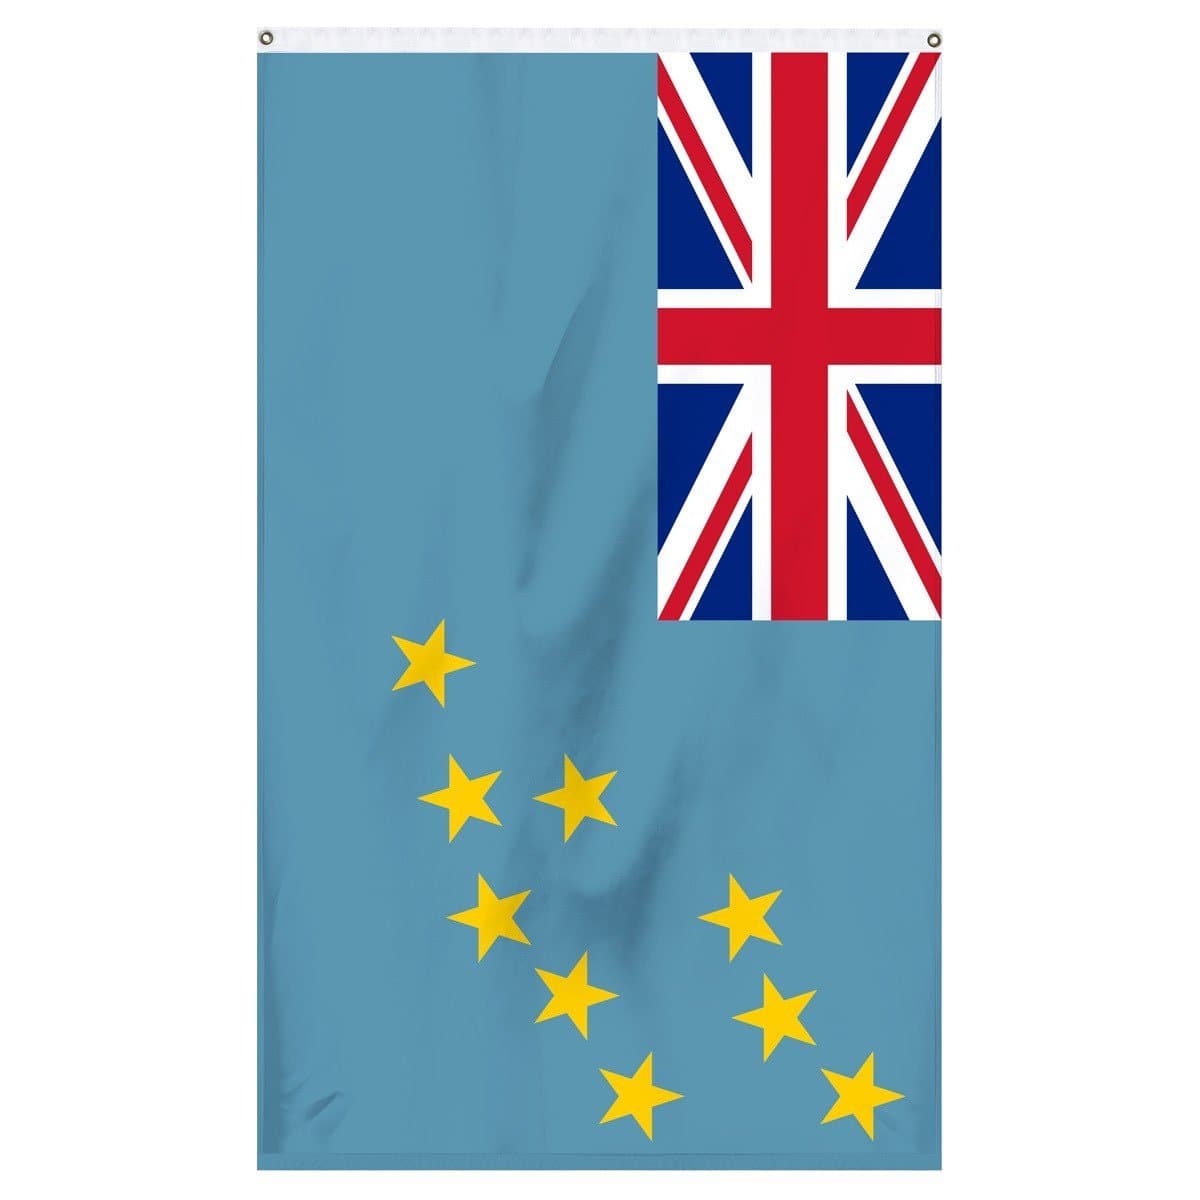 Tuvalu National Flag for sale to buy online from Atlantic Flagpole. Light blue flag with the great Britain flag in the corner and 9 golden stars 